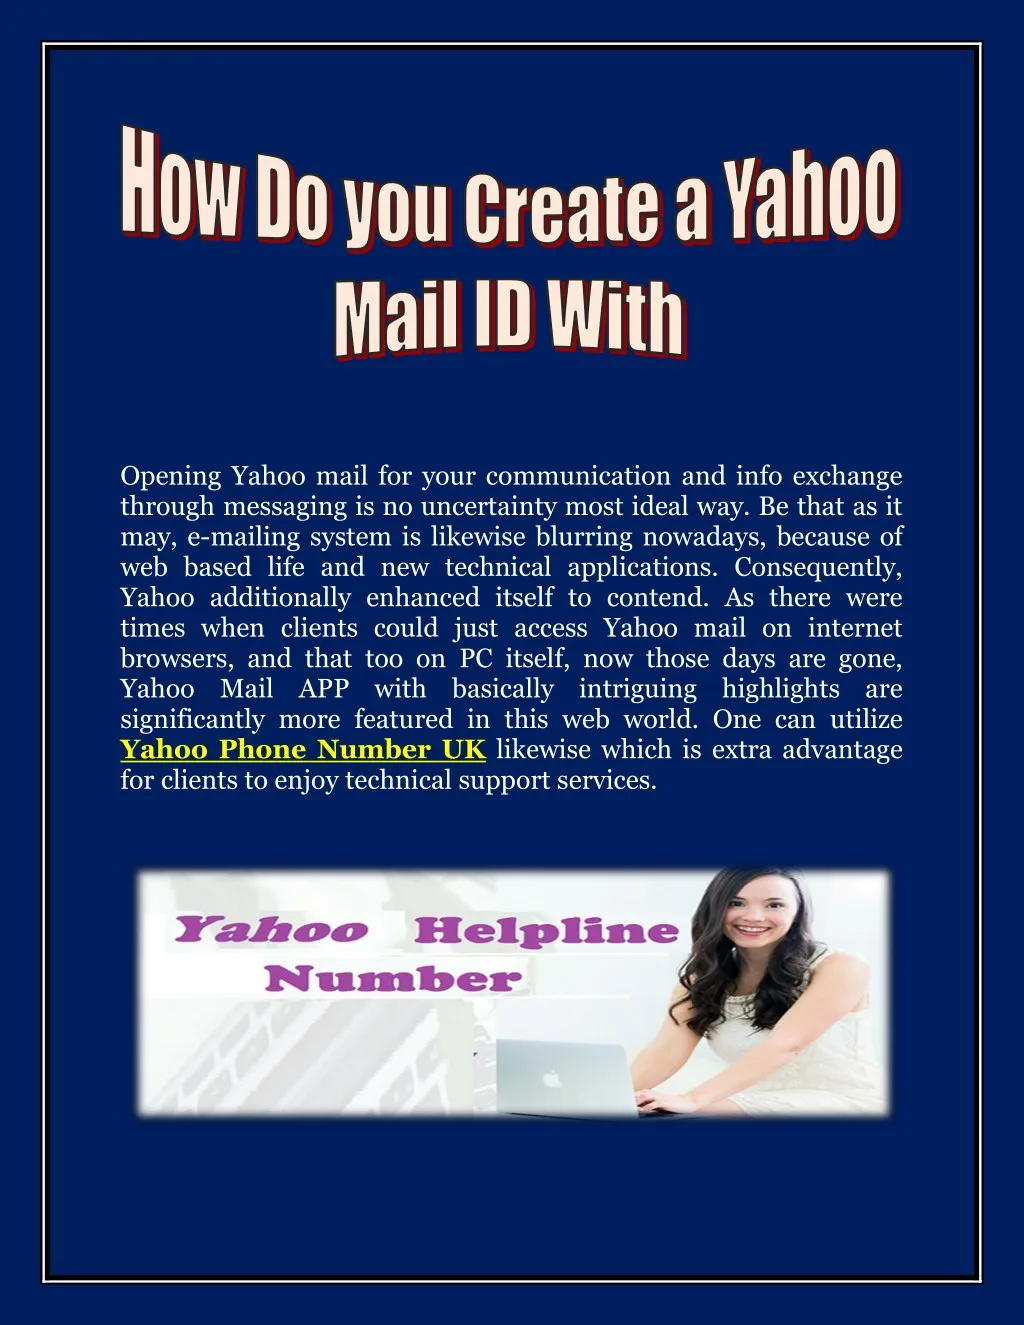 opening yahoo mail for your communication